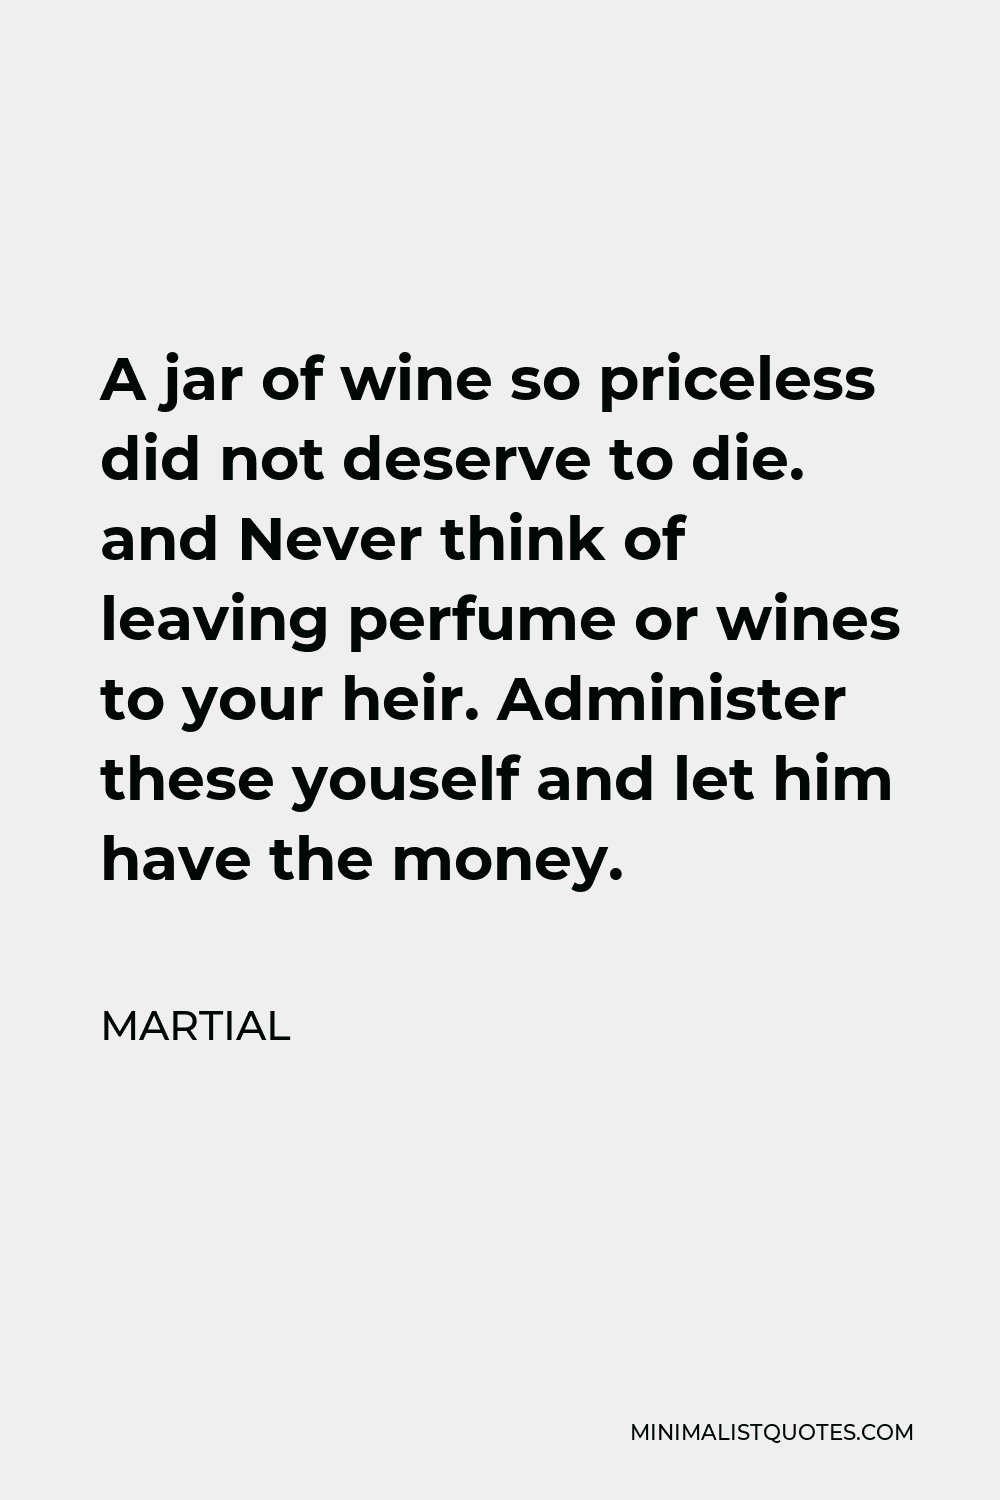 Martial Quote - A jar of wine so priceless did not deserve to die. and Never think of leaving perfume or wines to your heir. Administer these youself and let him have the money.